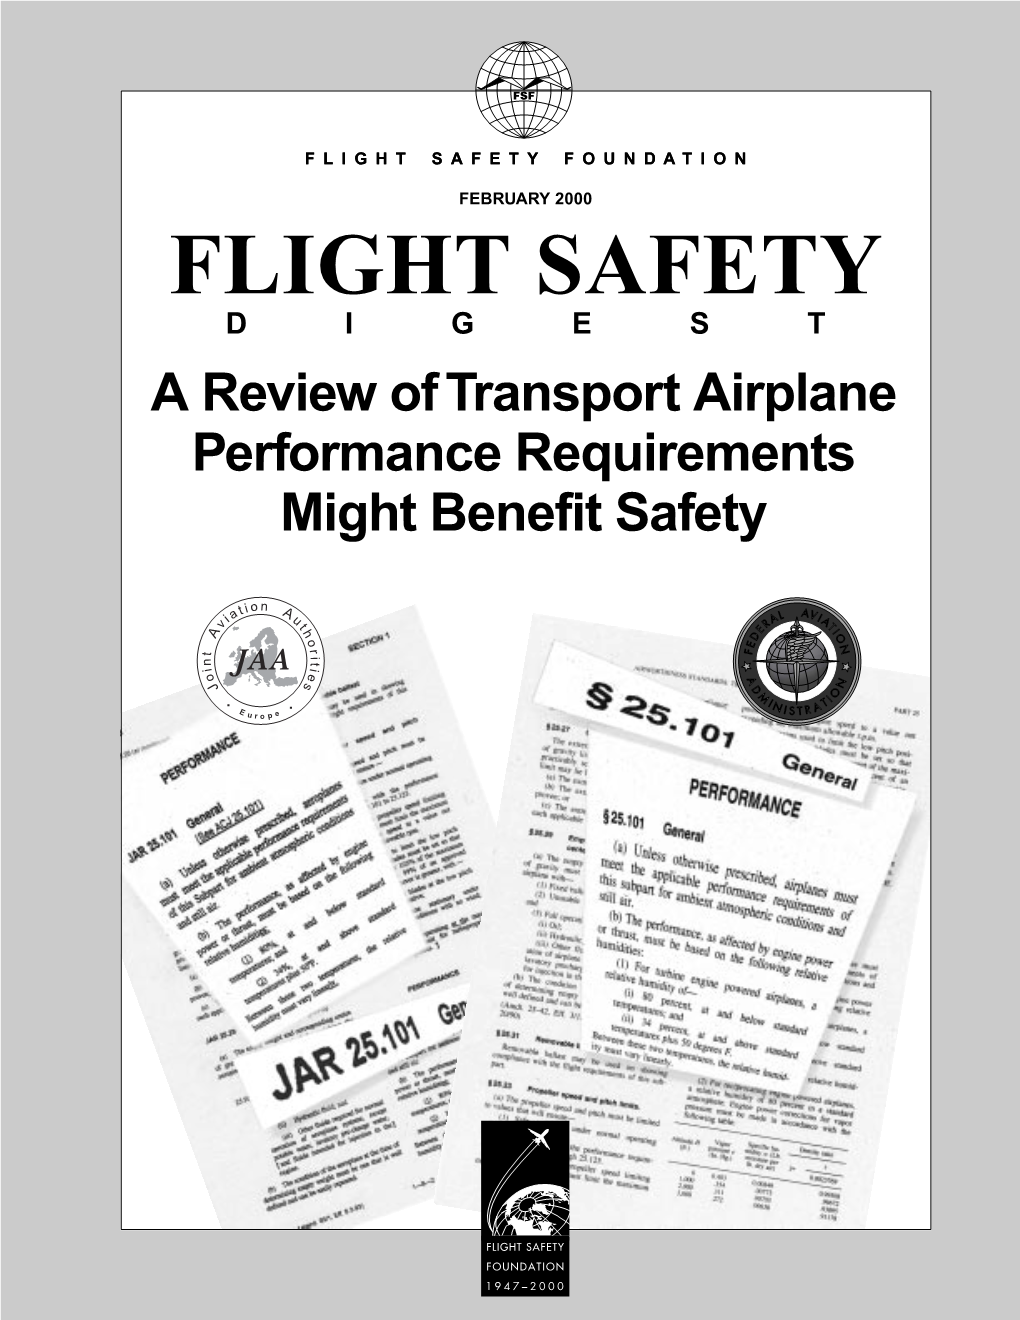 A Review of Transport Airplane Performance Requirements Might Benefit Safety